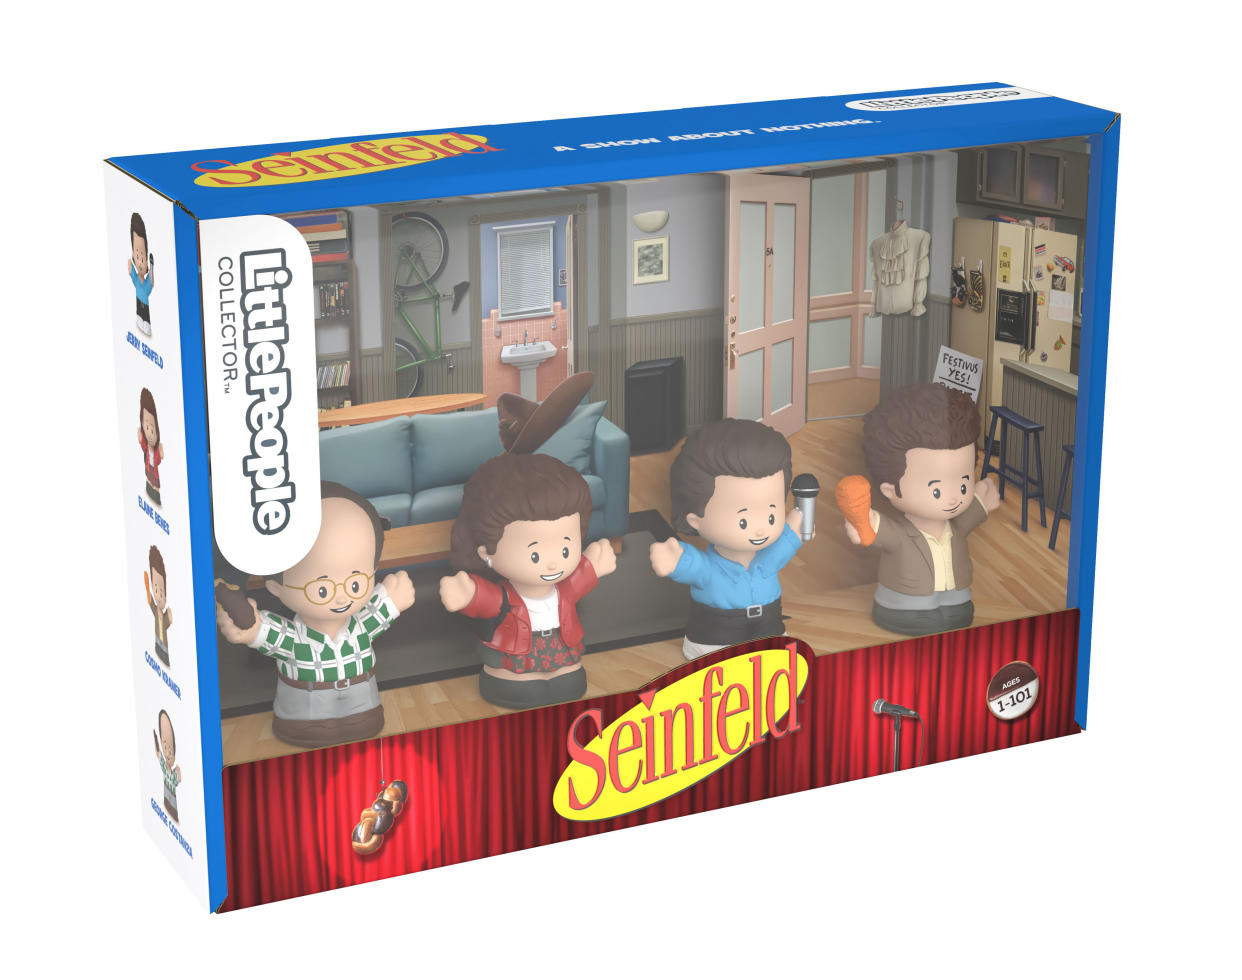 Seinfeld joins Fisher-Price's Little People Collection line. (Photo: Courtesy of Fisher-Price)